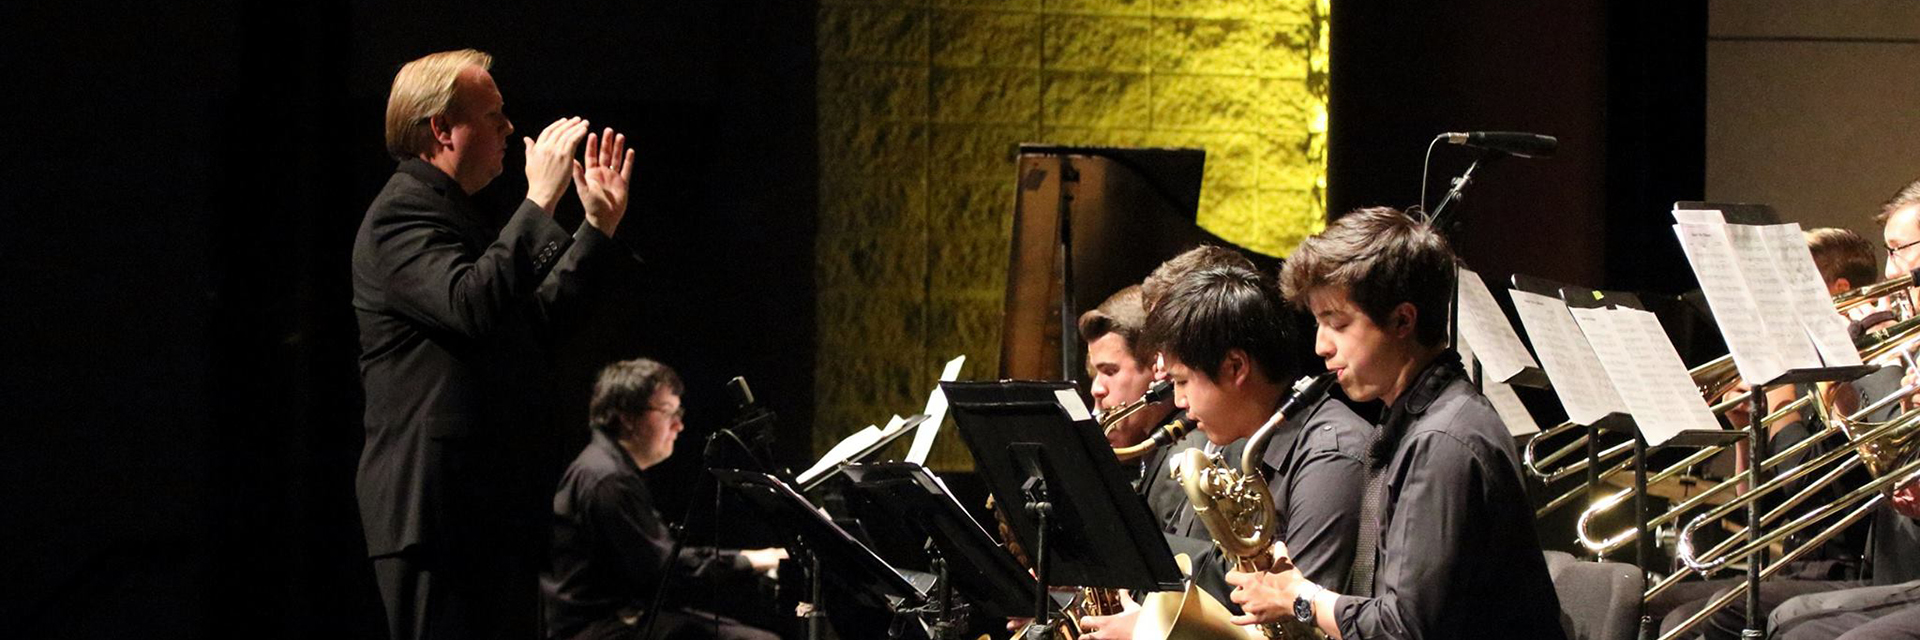 Chip Crotts directing a jazz ensemble during a concert.